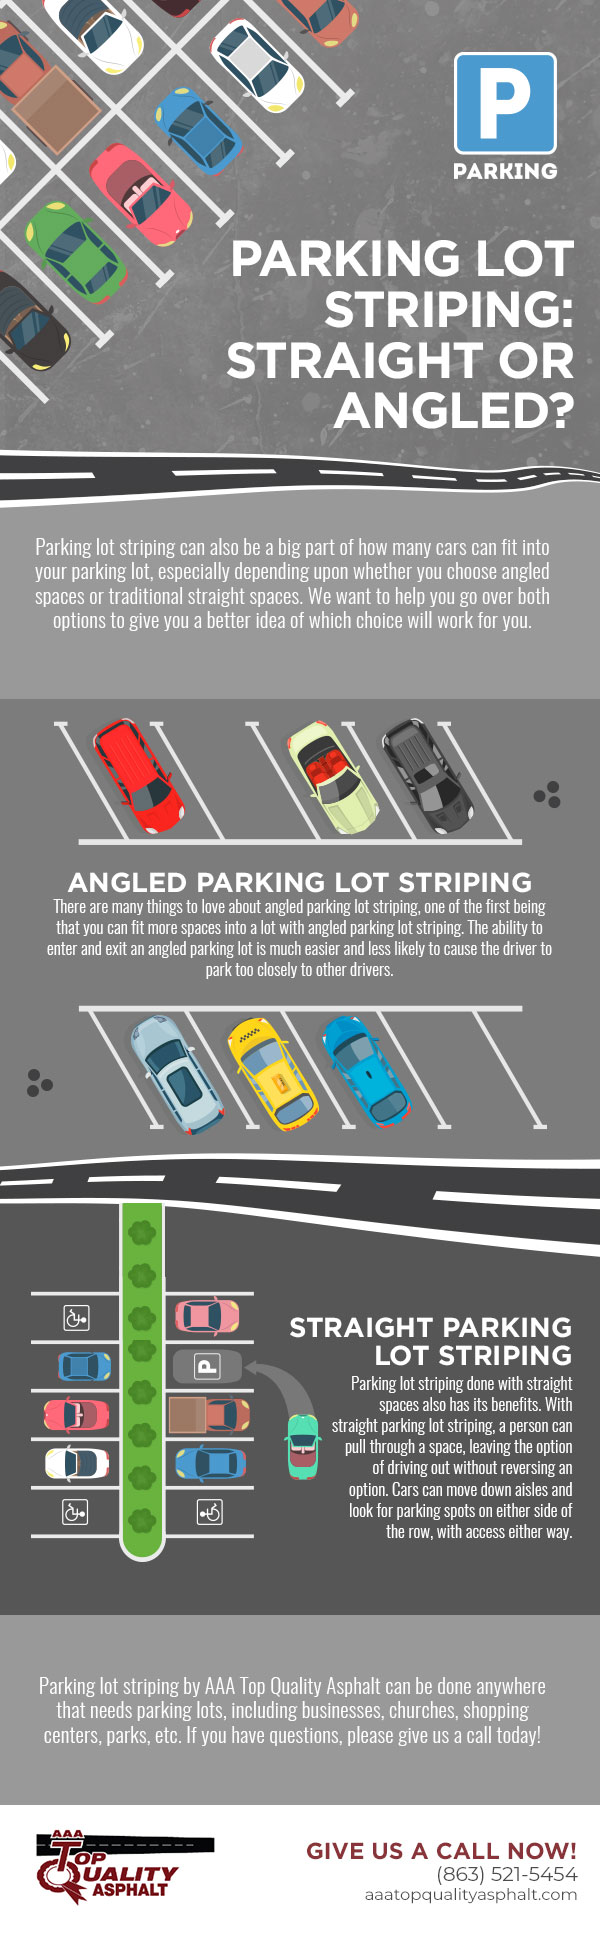 Parking Lot Striping: Straight or Angled?